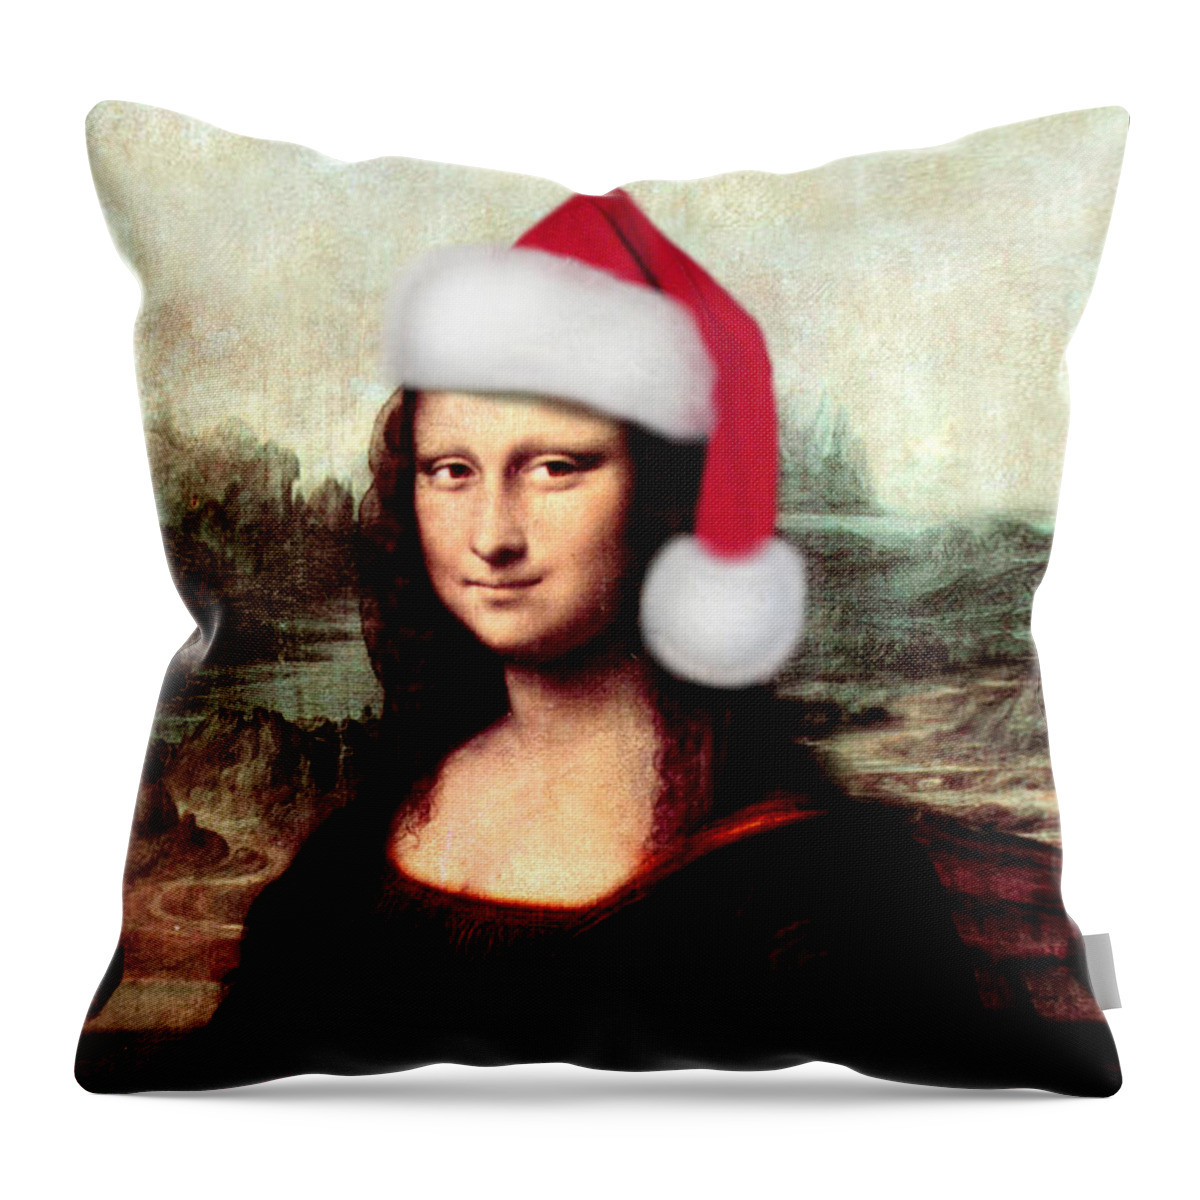 Mona Lisa Throw Pillow featuring the digital art Mona Lisa With Santa Hat by Gravityx9 Designs